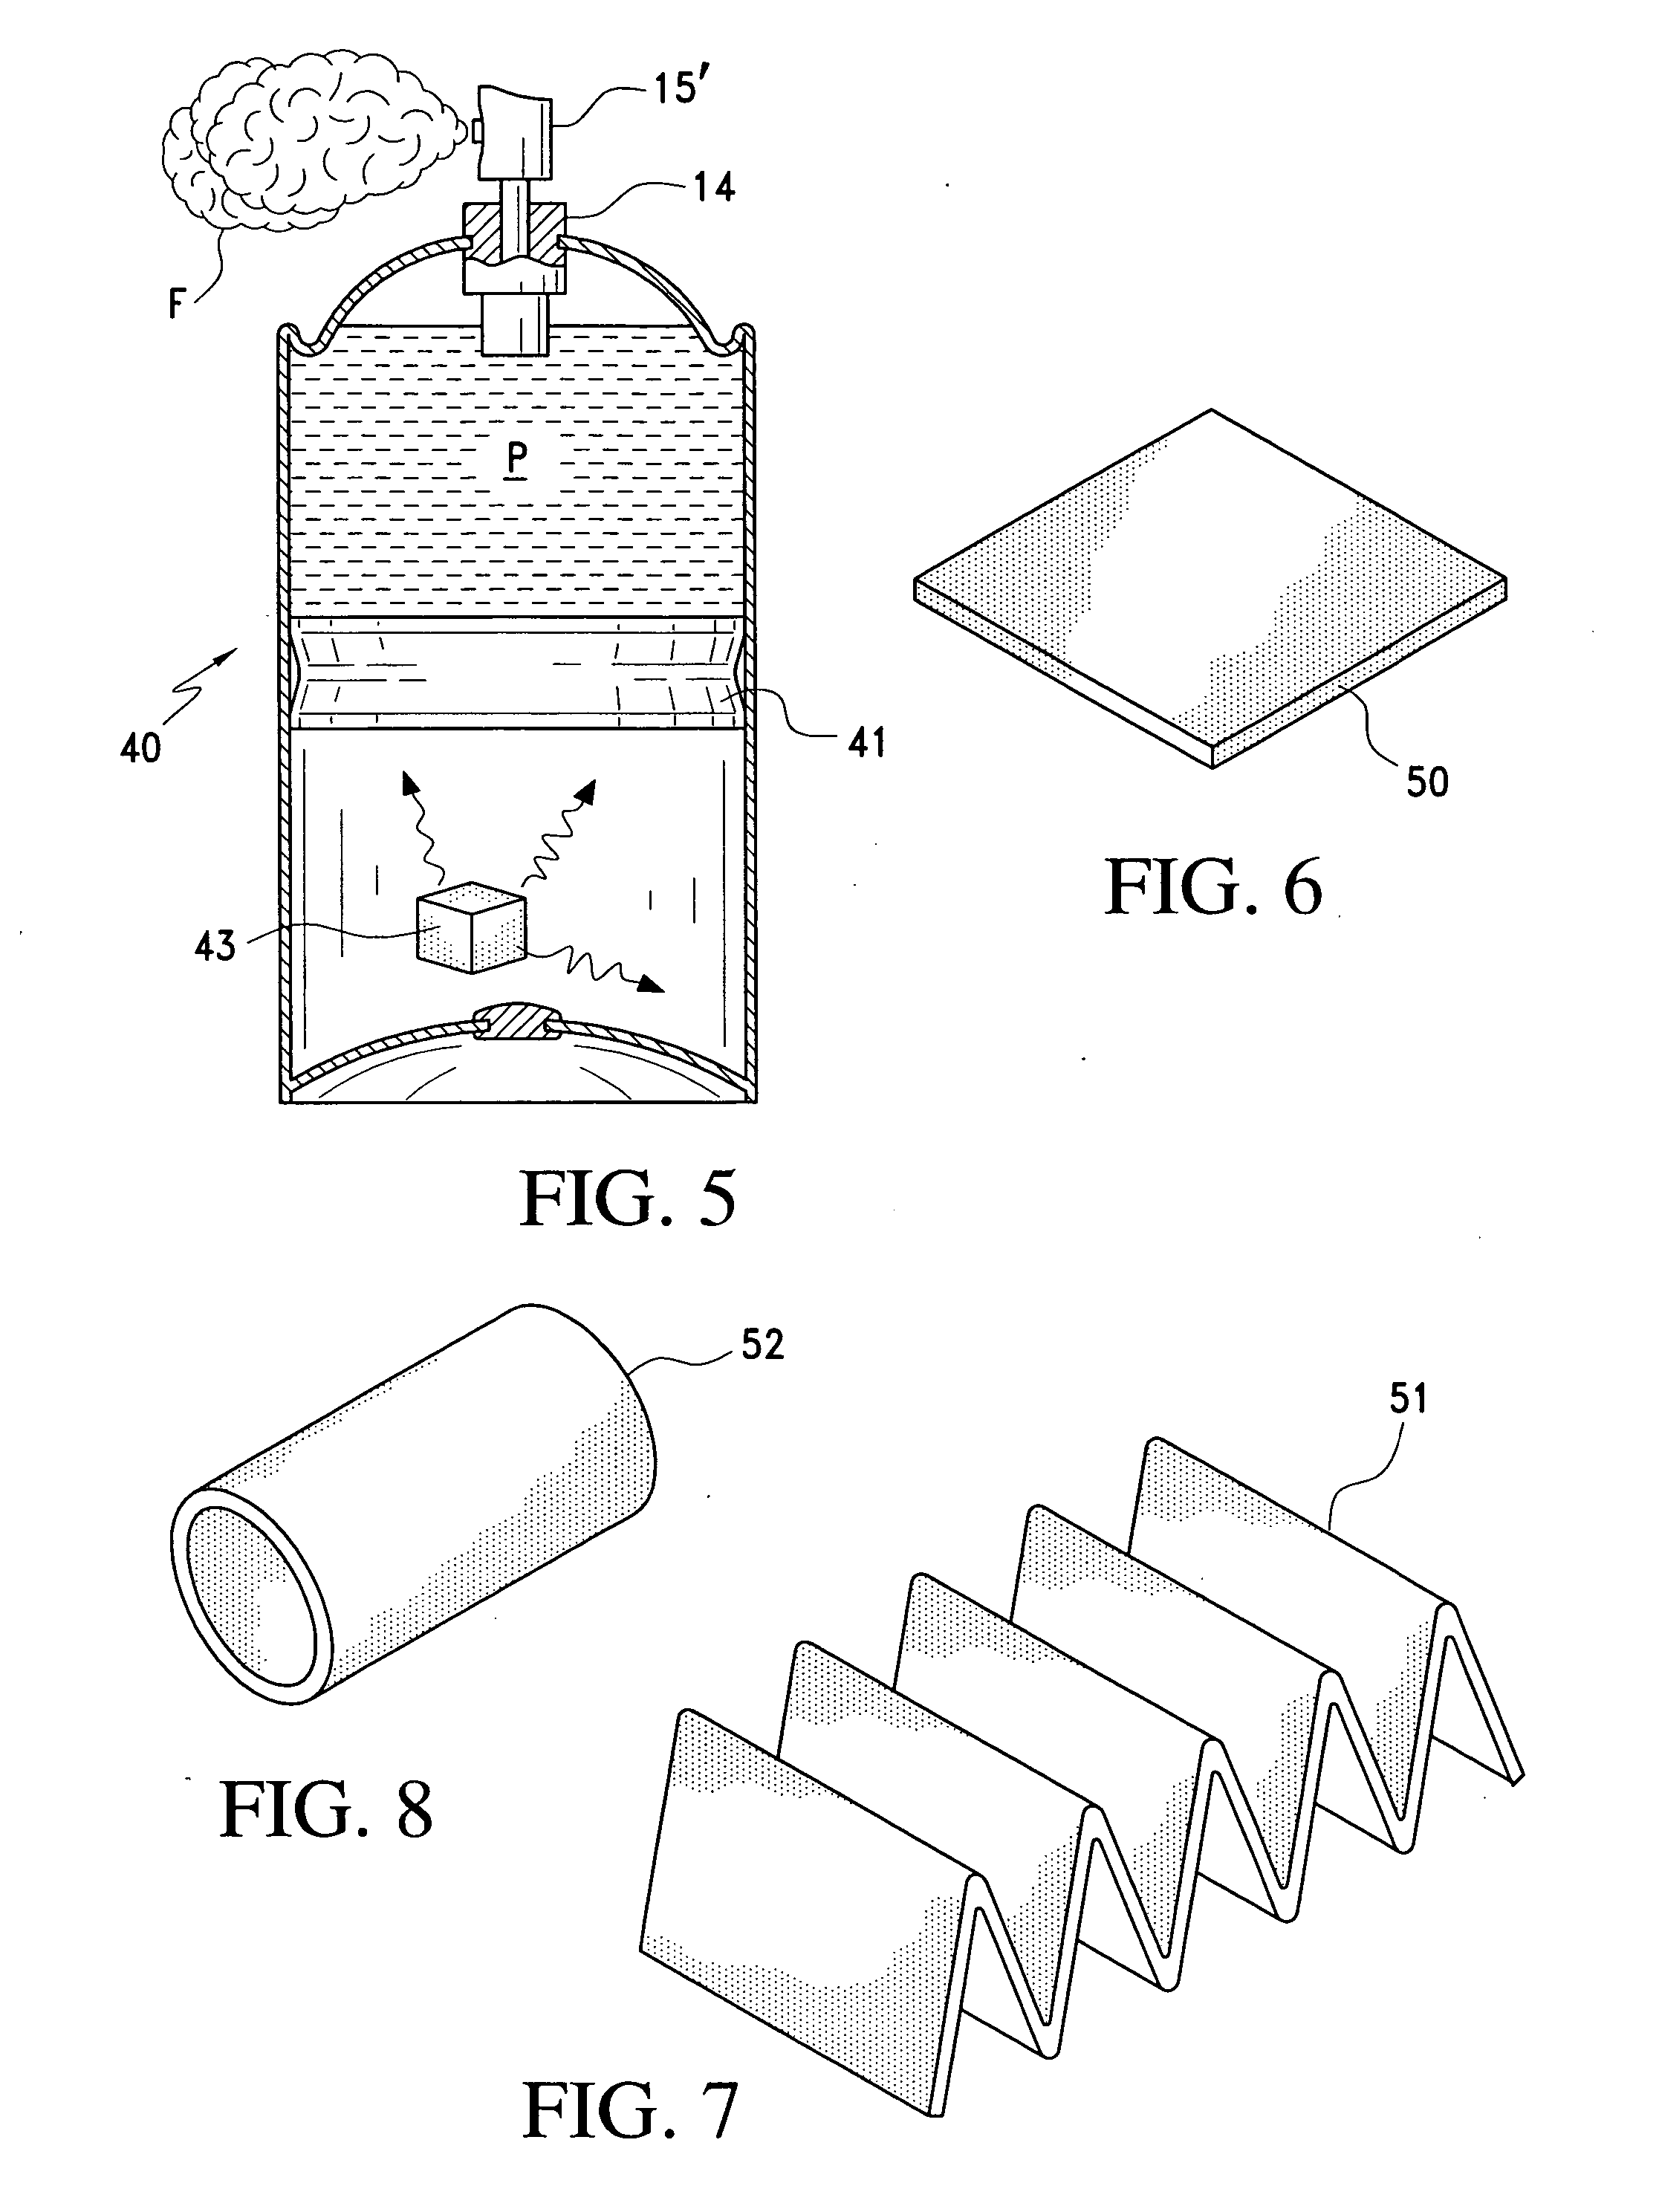 System and method for providing a reserve supply of gas in a pressurized container